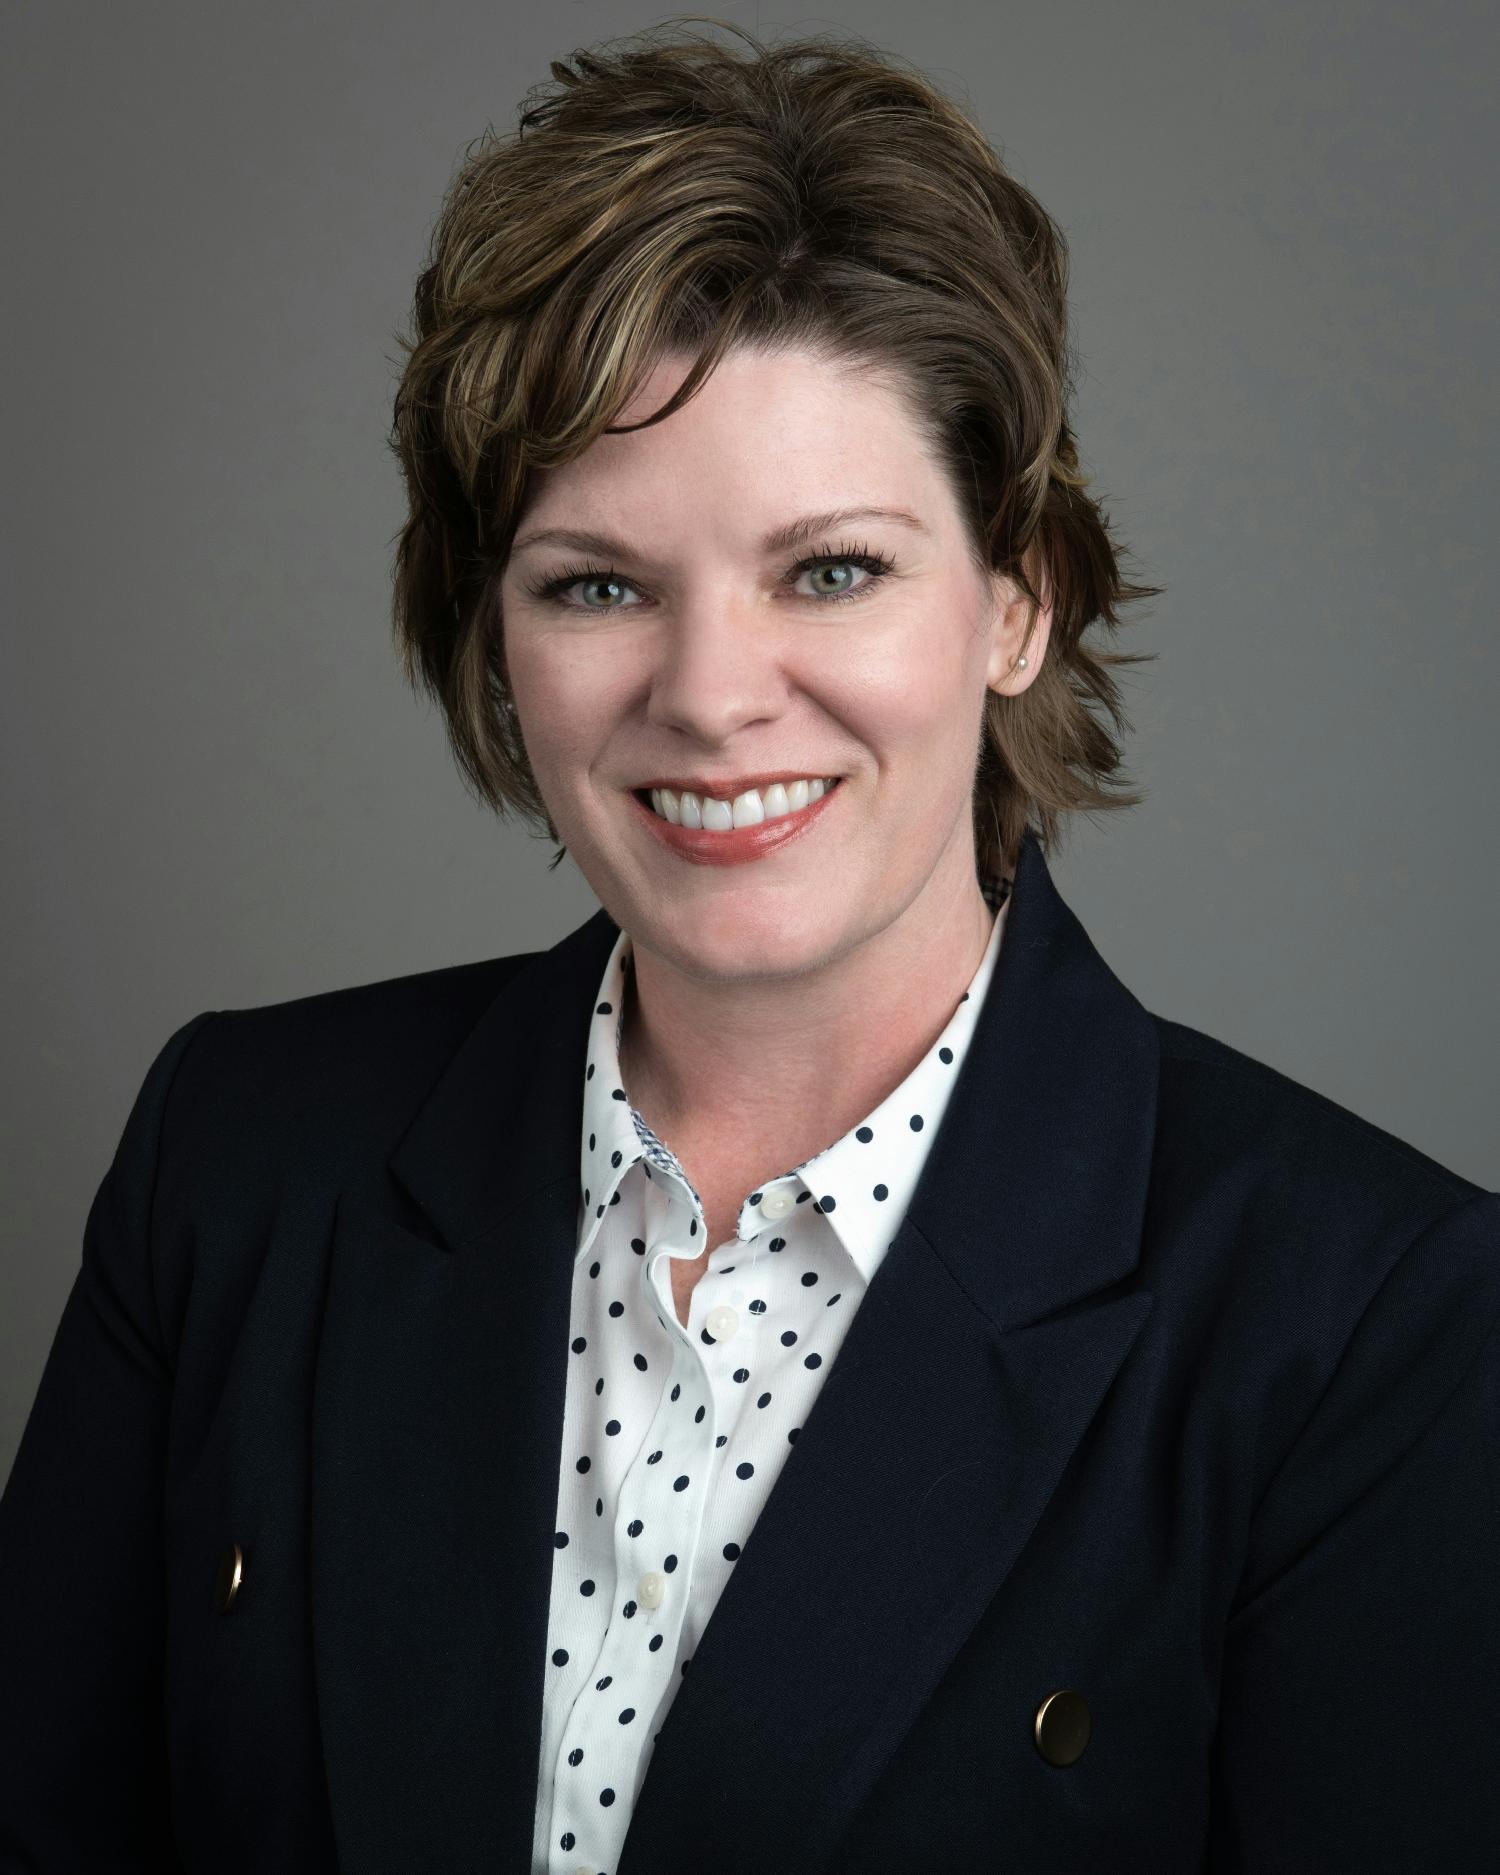 Lynn Wallace
Chief Sales and Business Development Officer